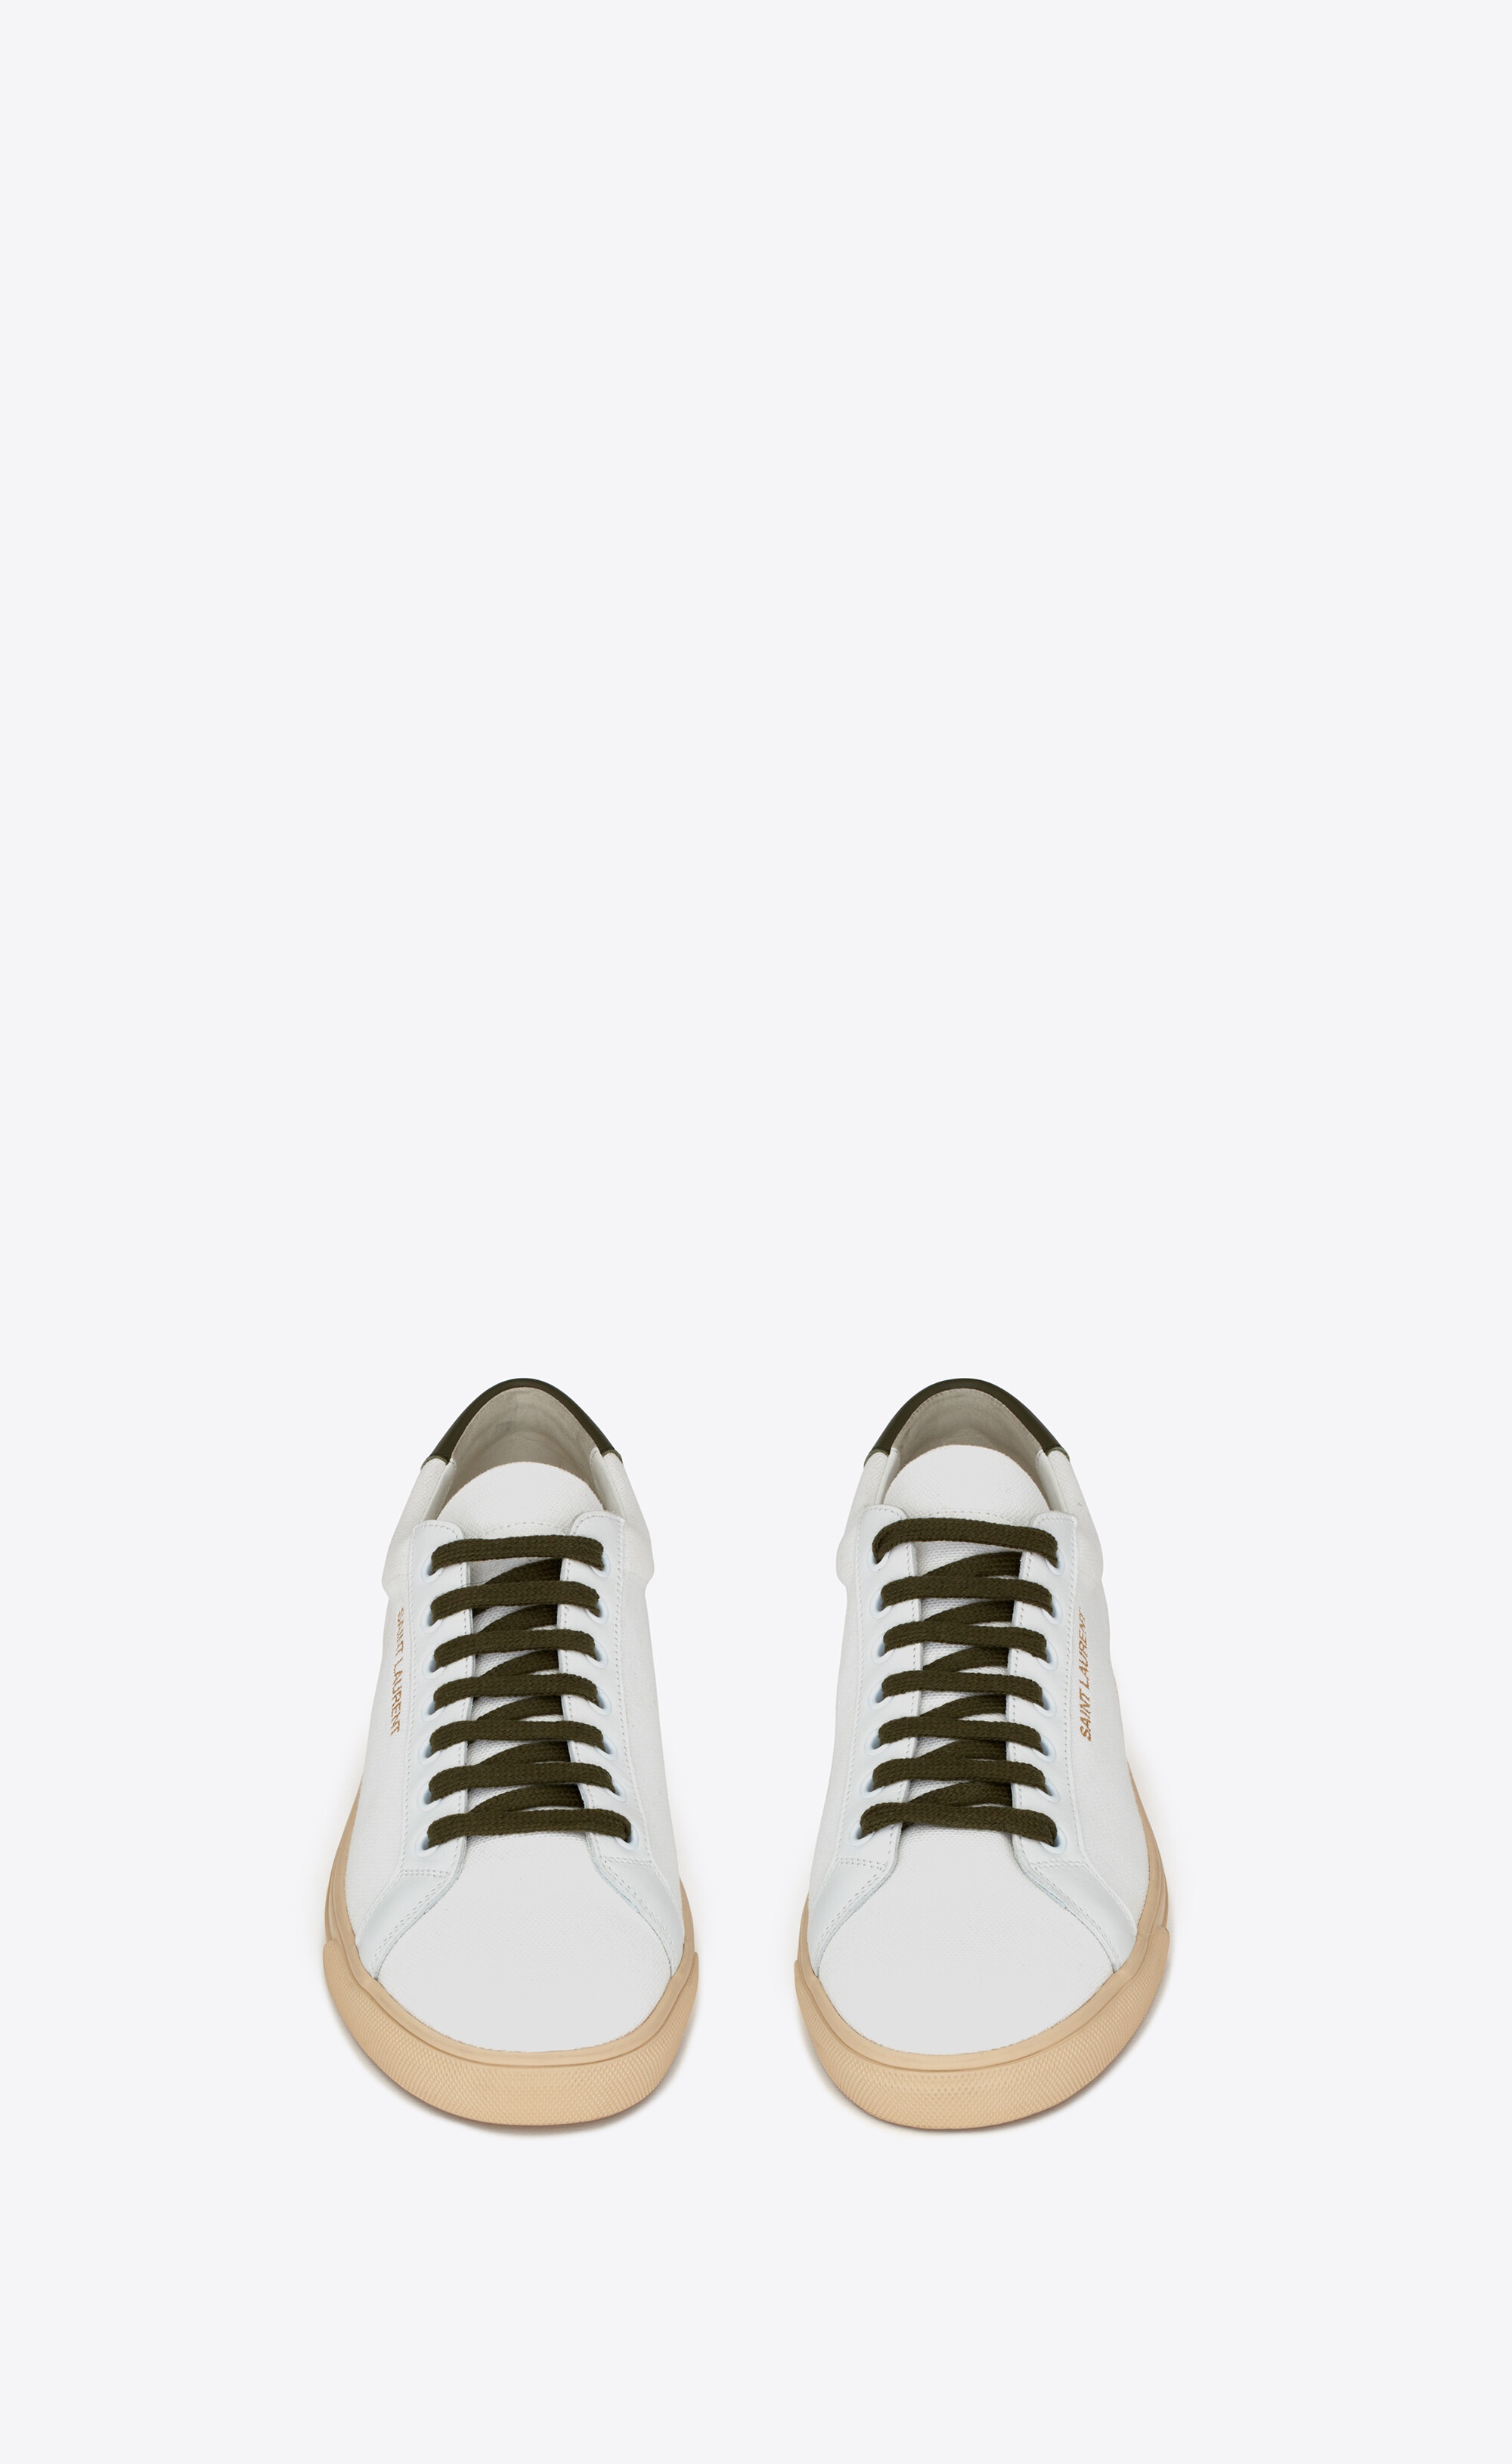 andy sneakers in canvas and leather - 2